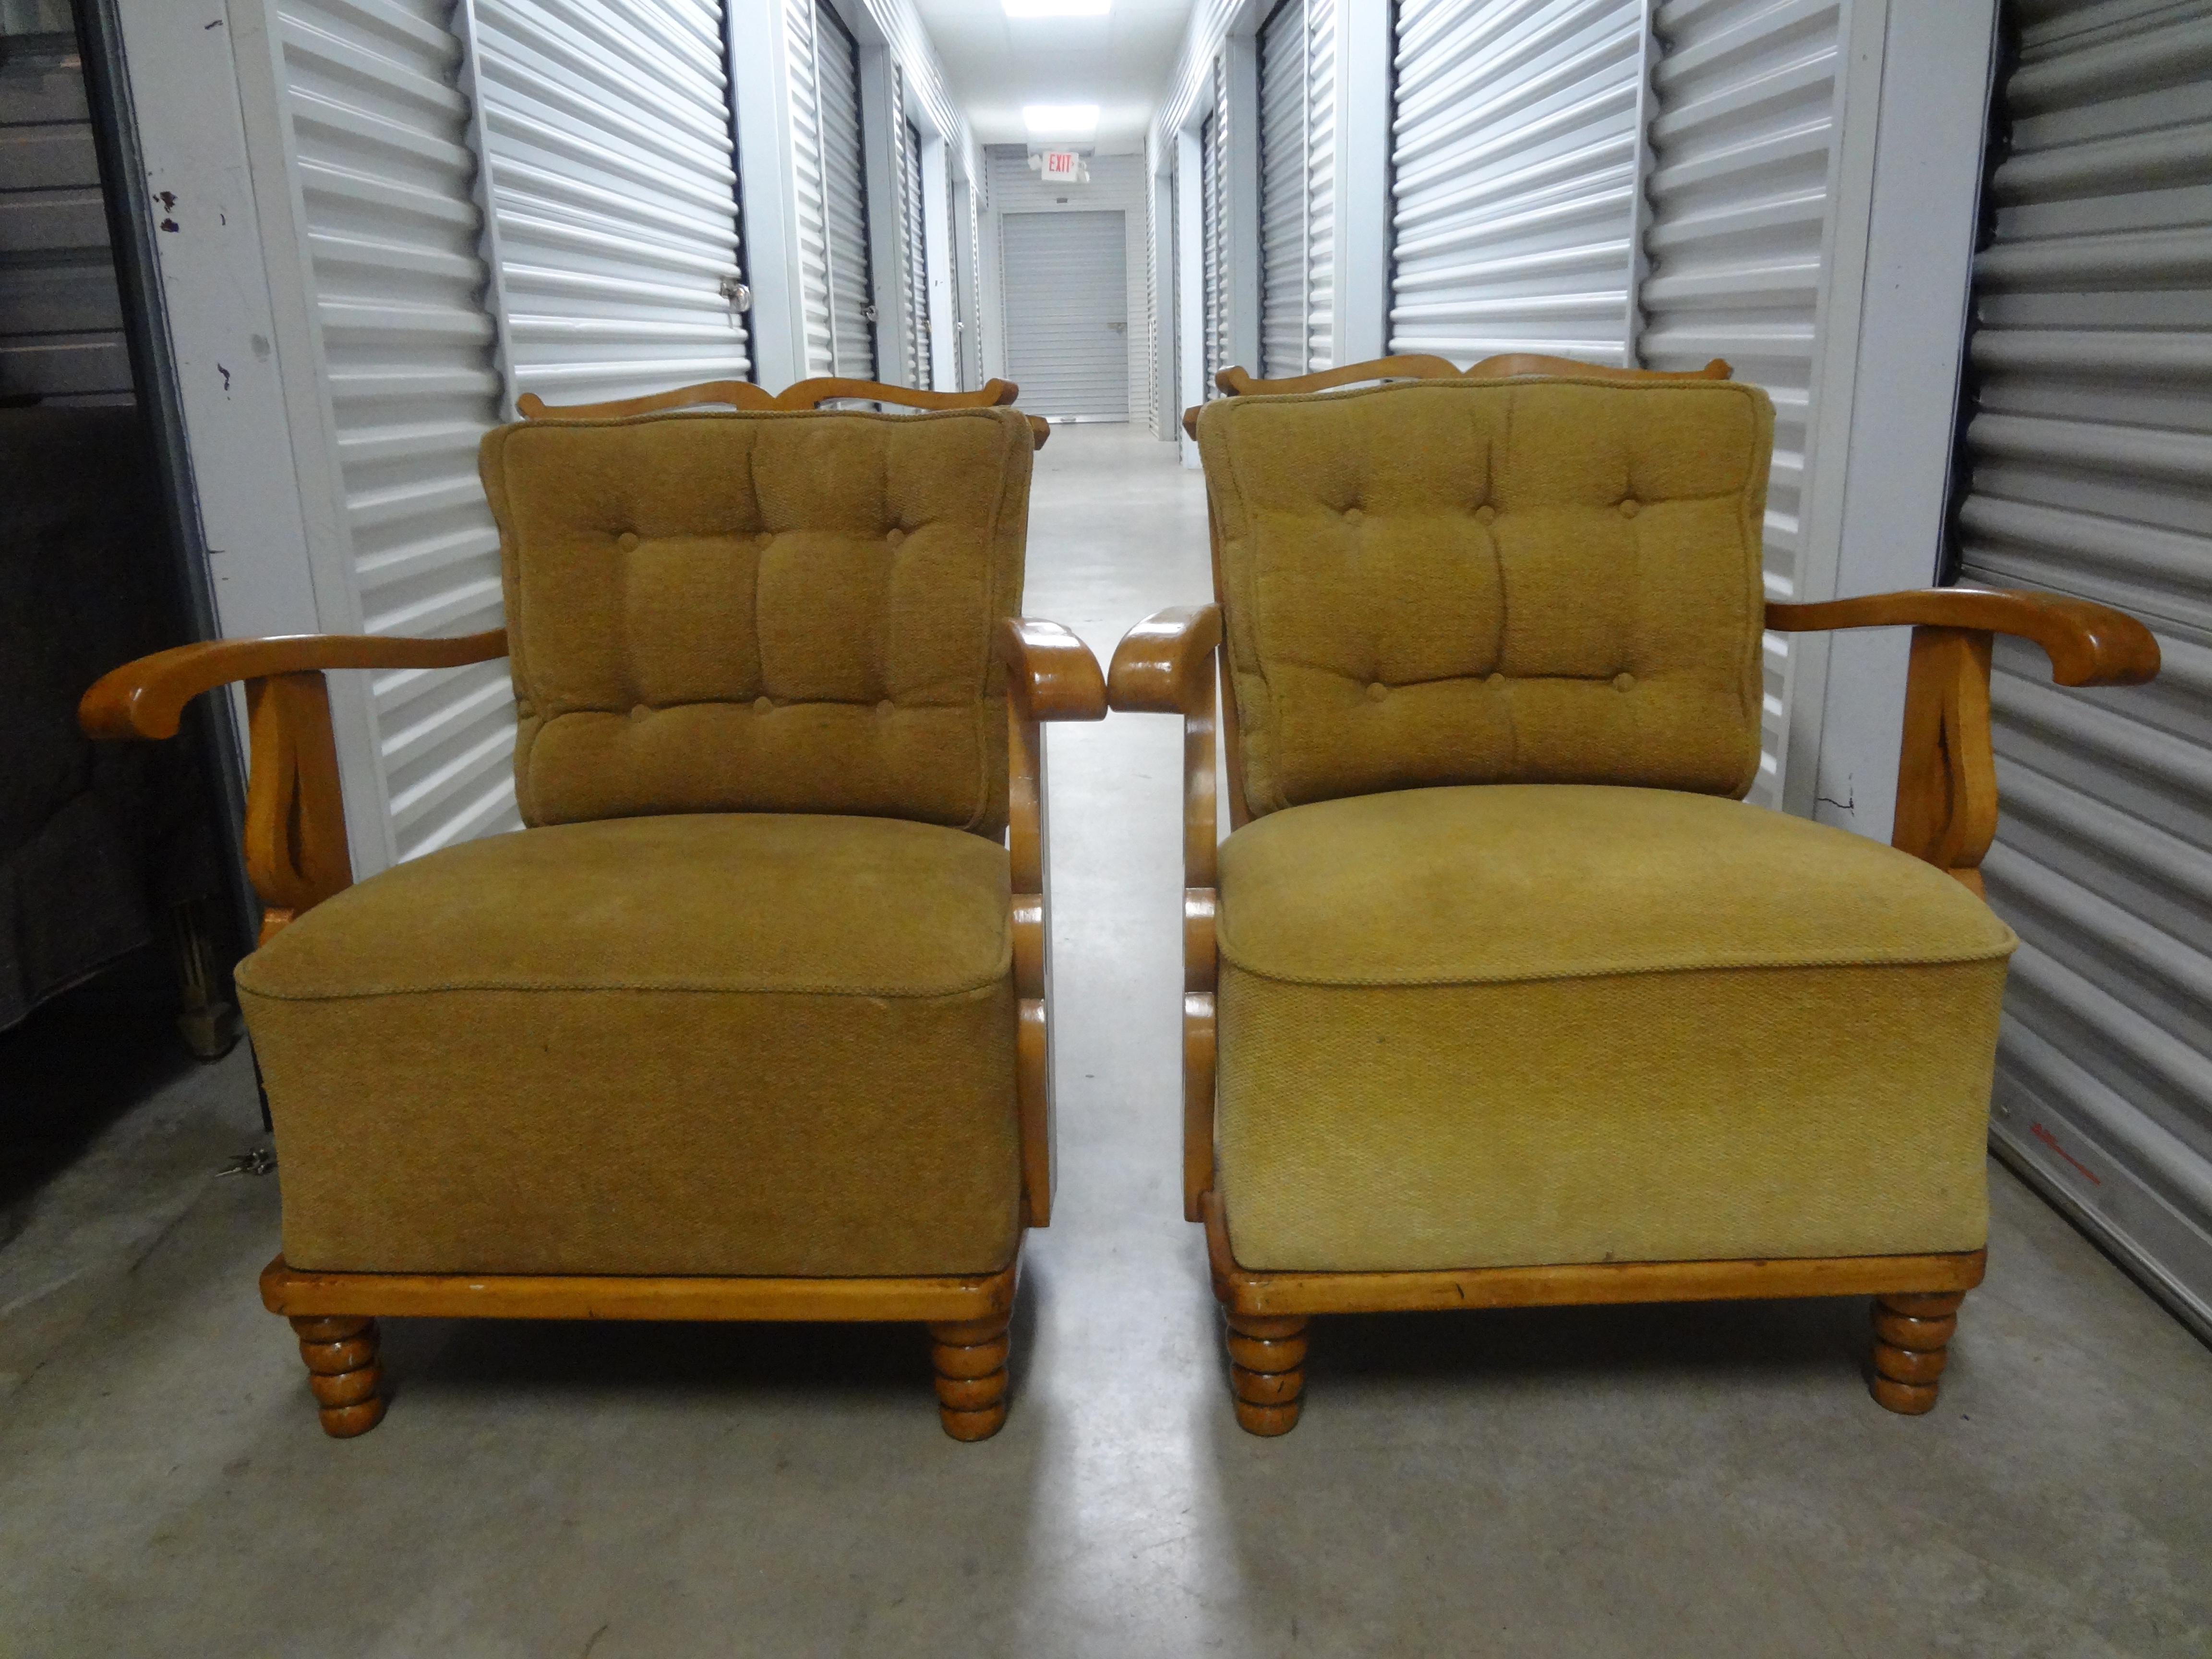 Unusual pair of French sycamore lounge chairs or armchairs inspired by André Arbus. This great pair of French chairs are made of sycamore and have beautiful detailing with twisted front legs. These stunning well designed and well-made French club